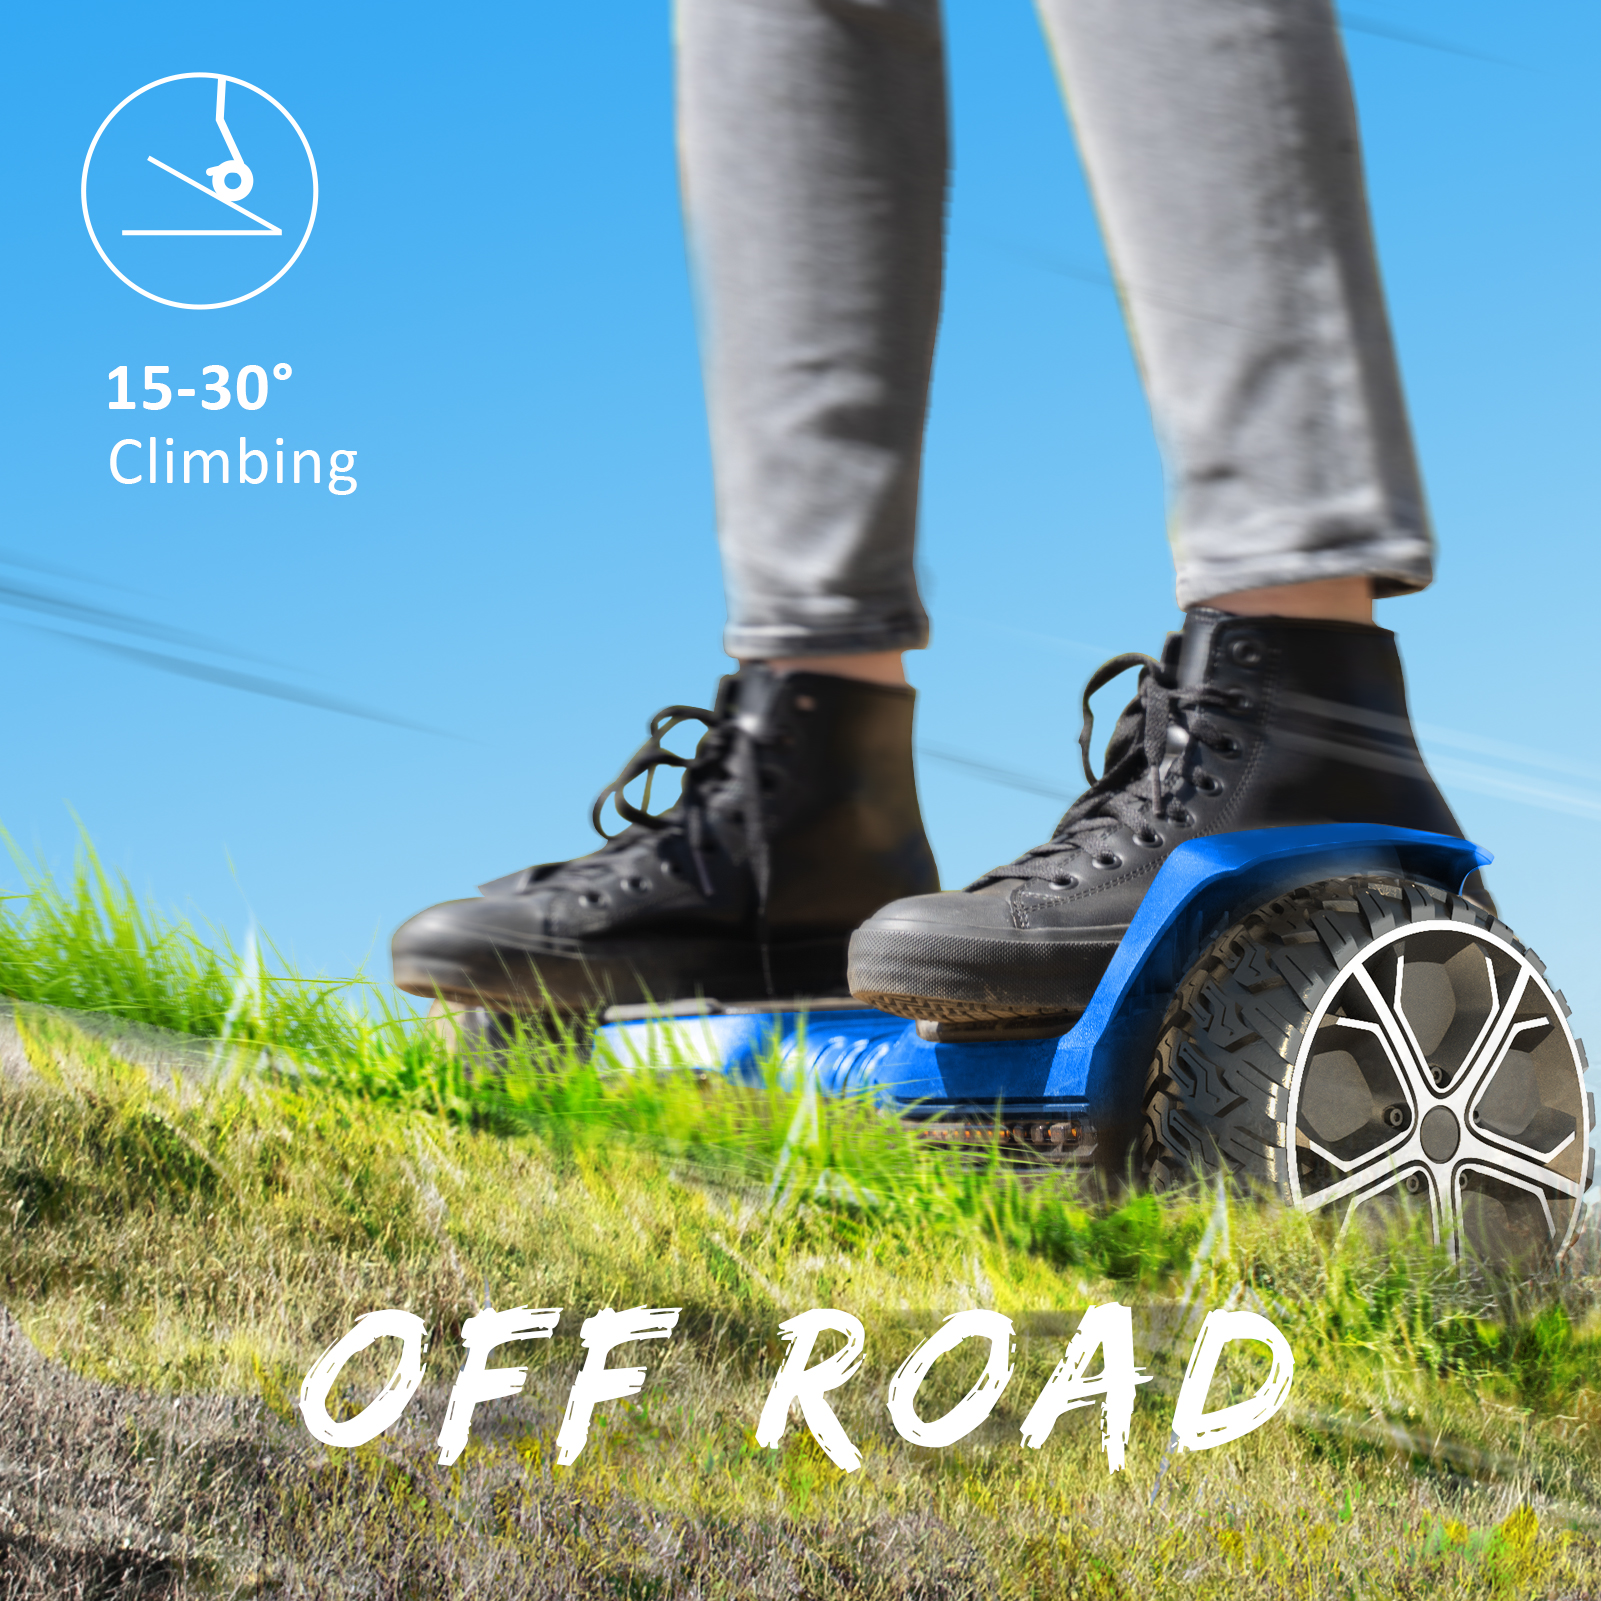 Flash Wheel Hoverboard with Bluetooth Speaker, Self Balancing Scooter for Kids & Adults, UL2272 Certified - image 3 of 12